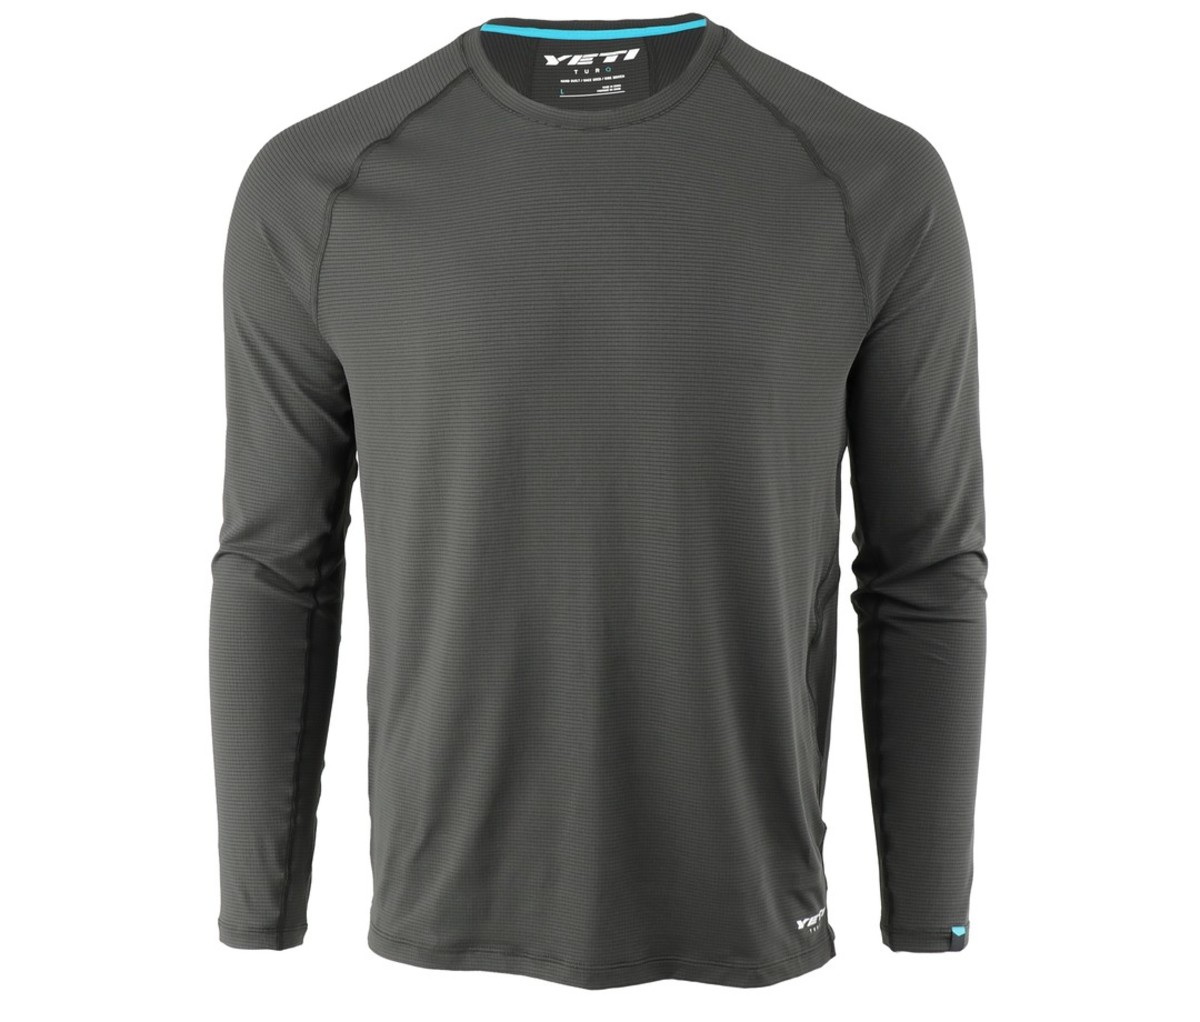 An image of a Yeti Turq Air LS Jersey in slate.